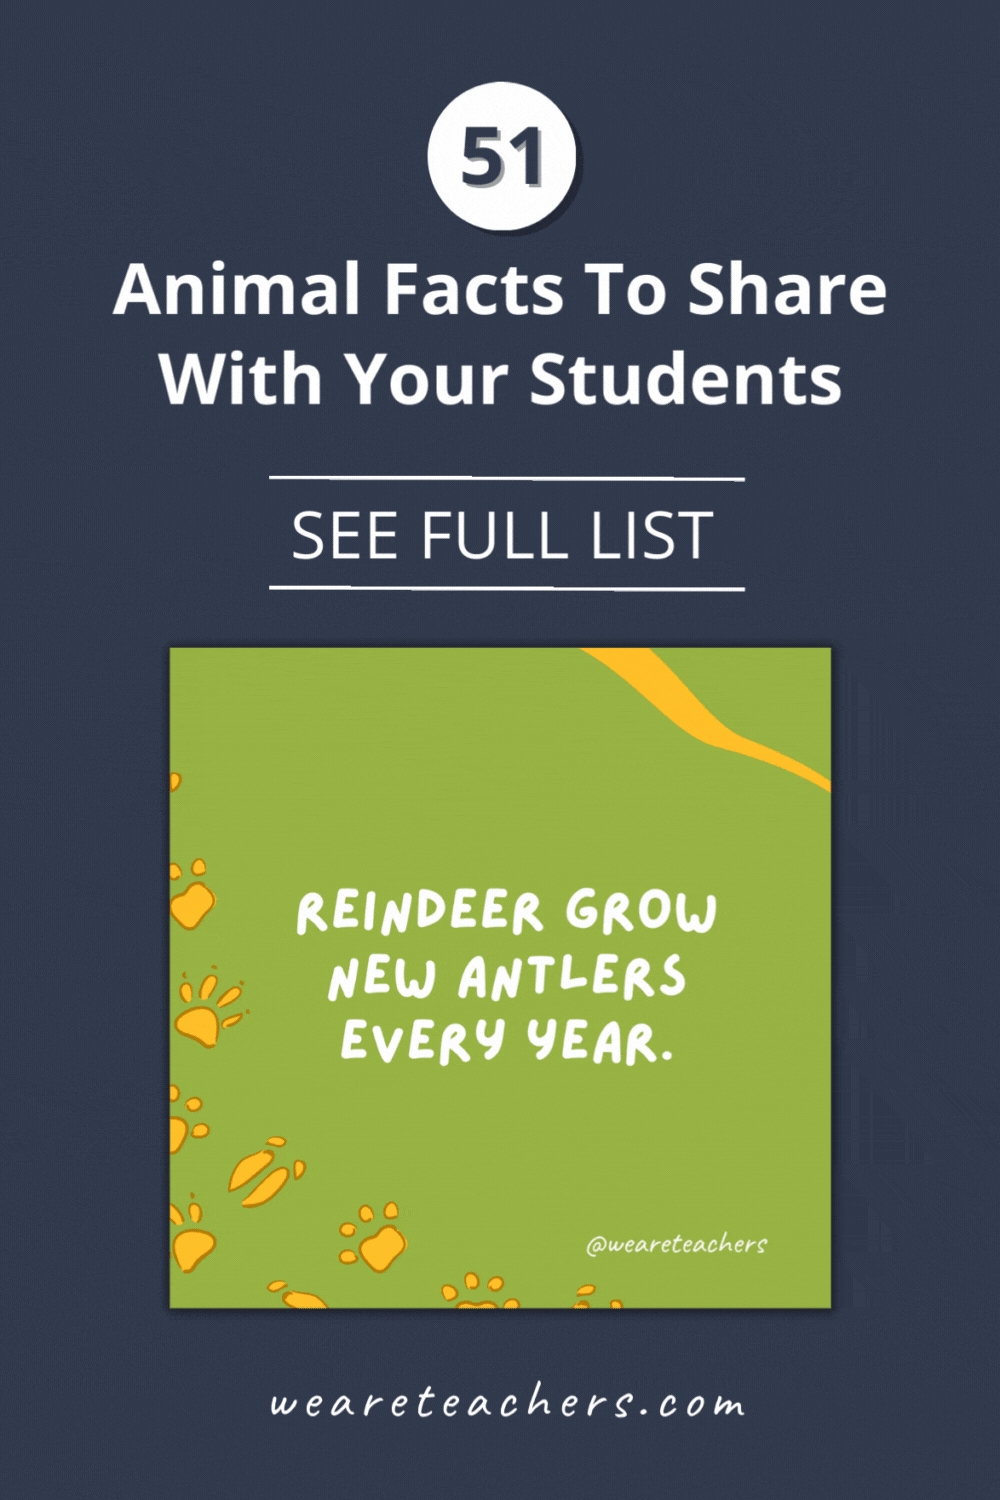 These animal facts for kids are great for introducing students to how amazing, gross, fast, and fun animals can be!